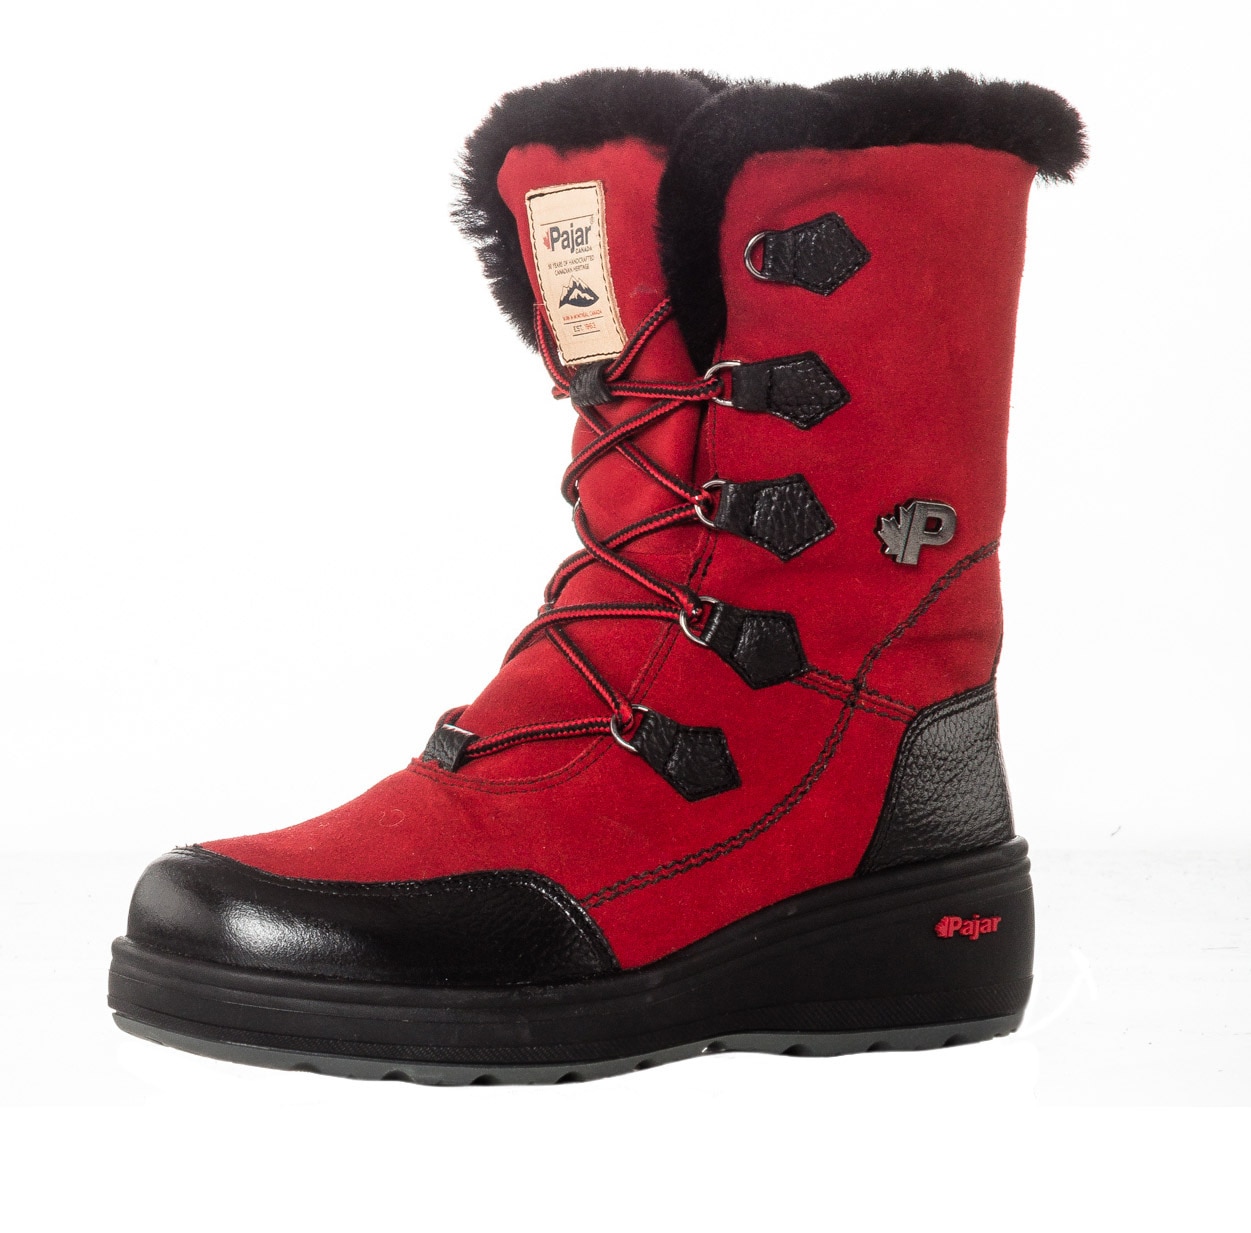 women's boots with retractable ice cleats